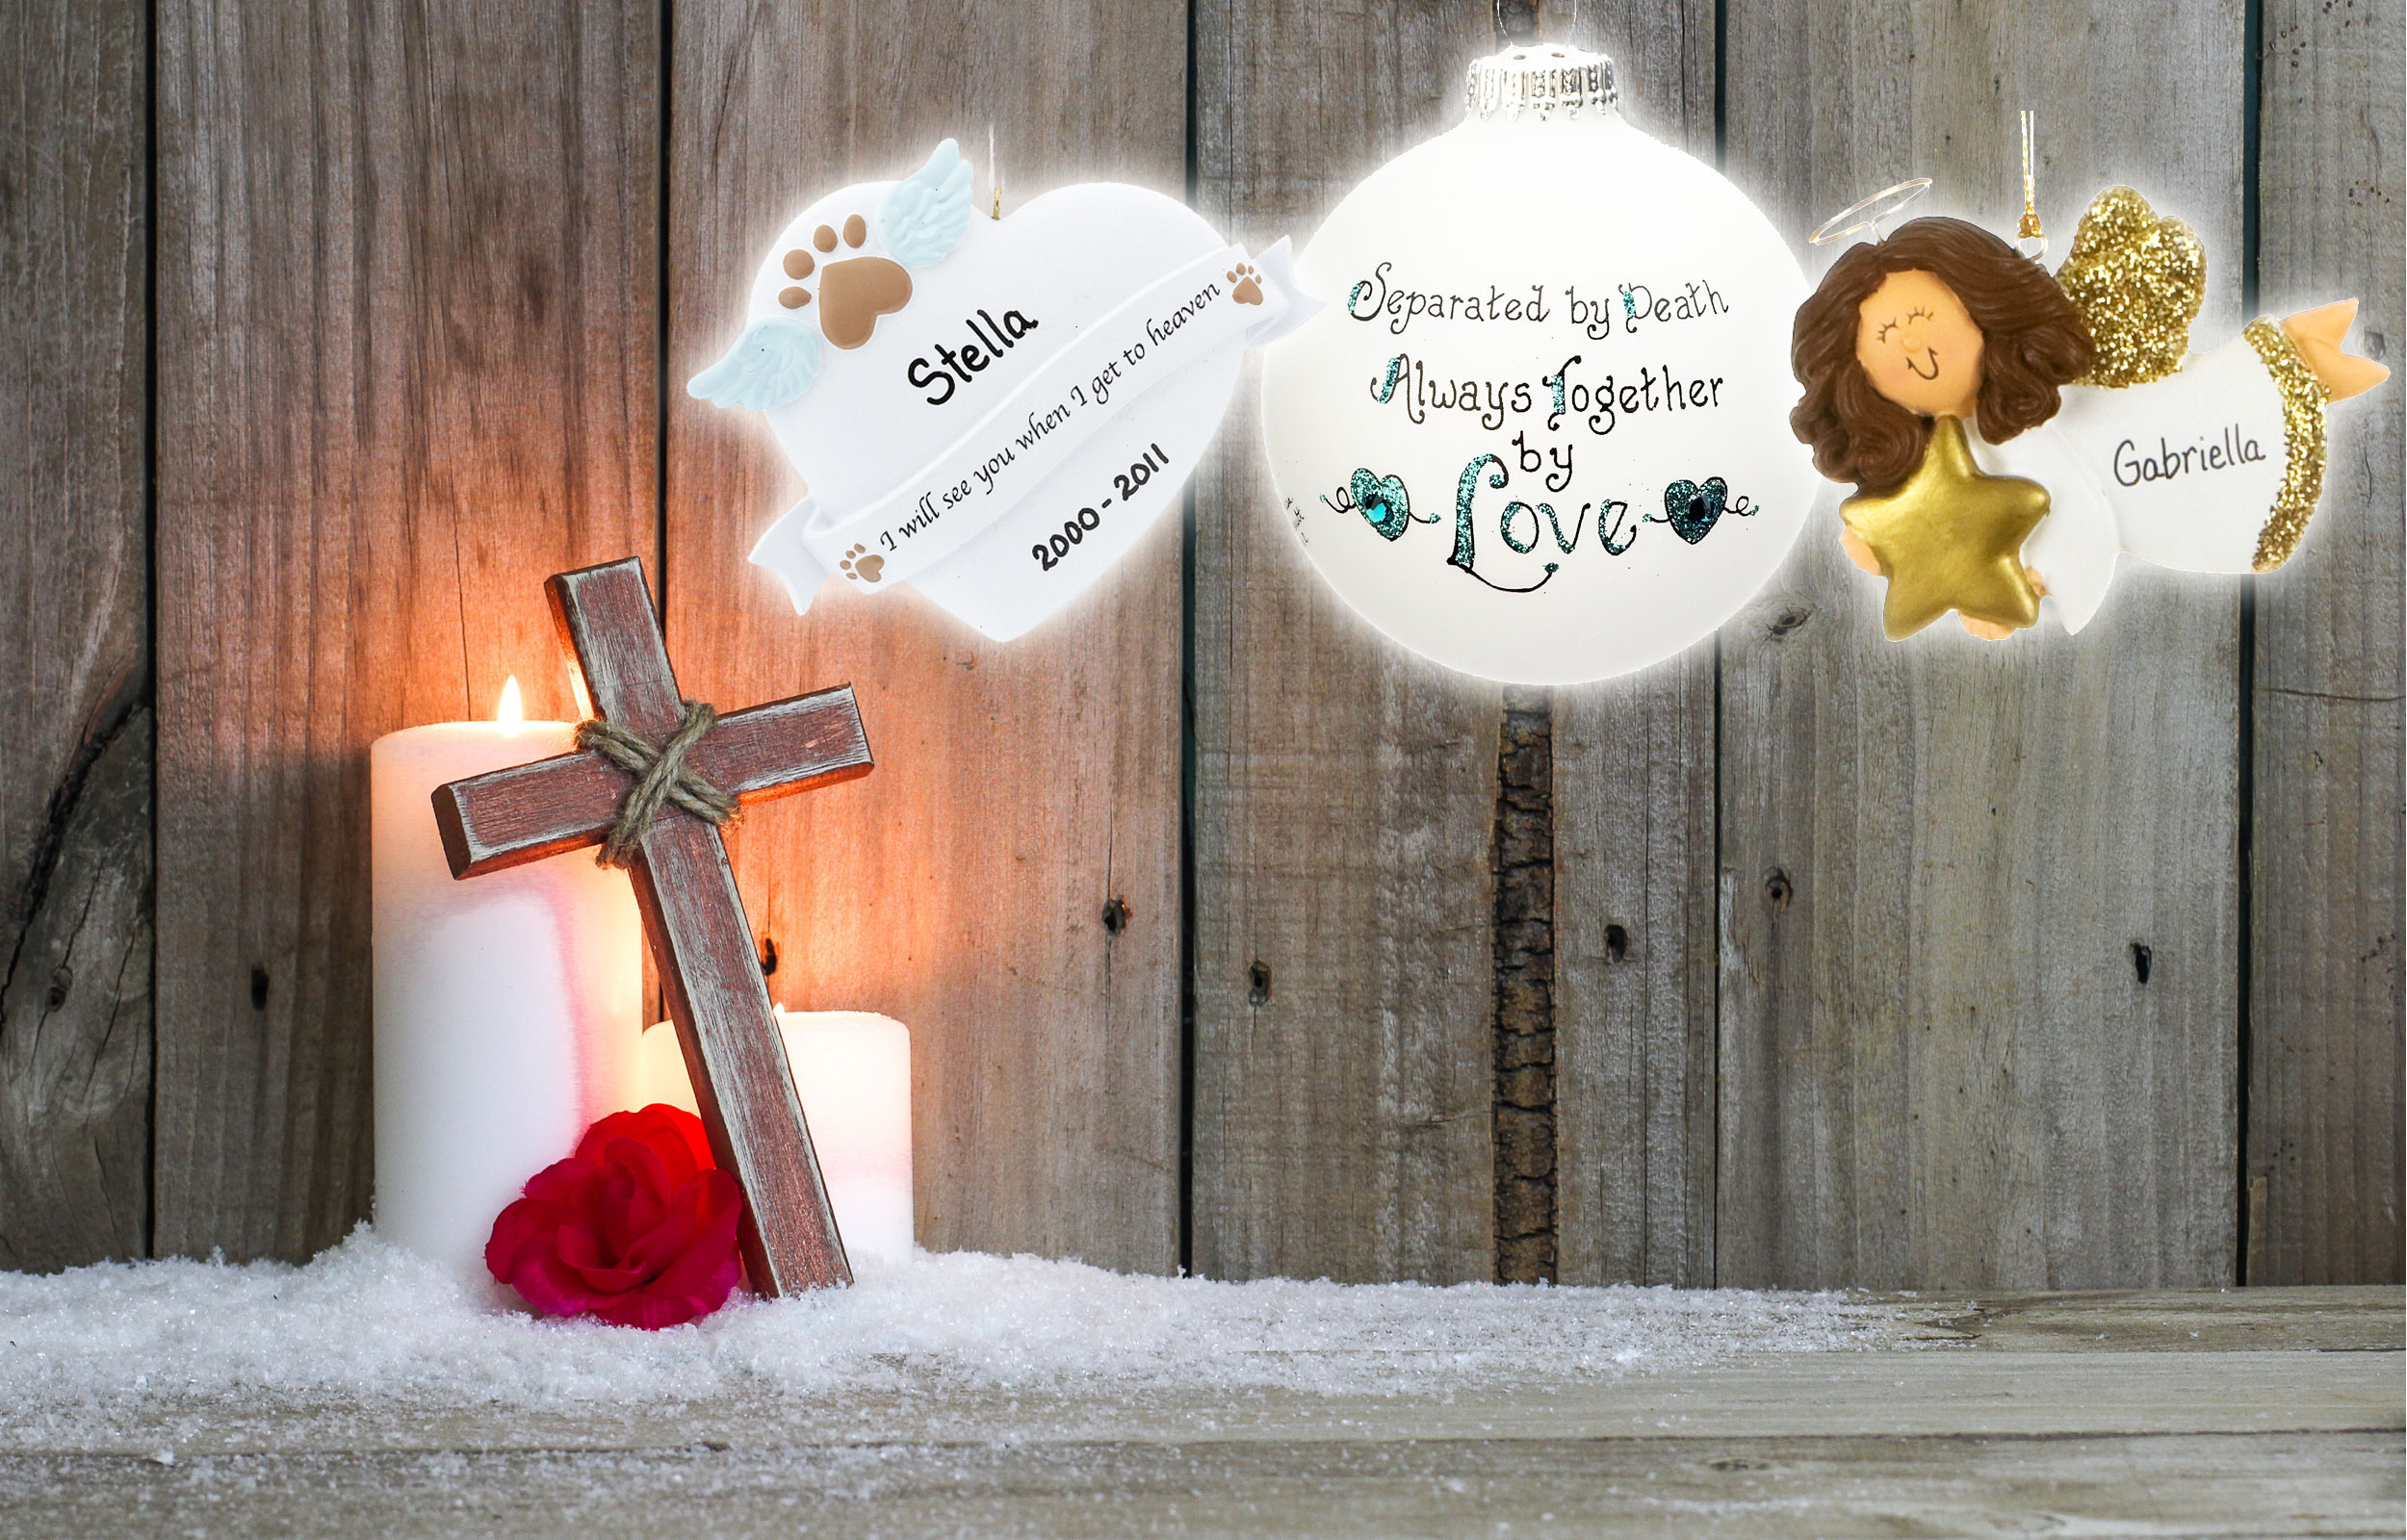 In memory of memorial personalized Christmas ornaments including an angel, glass ball and pet. | OrnamentShop.com